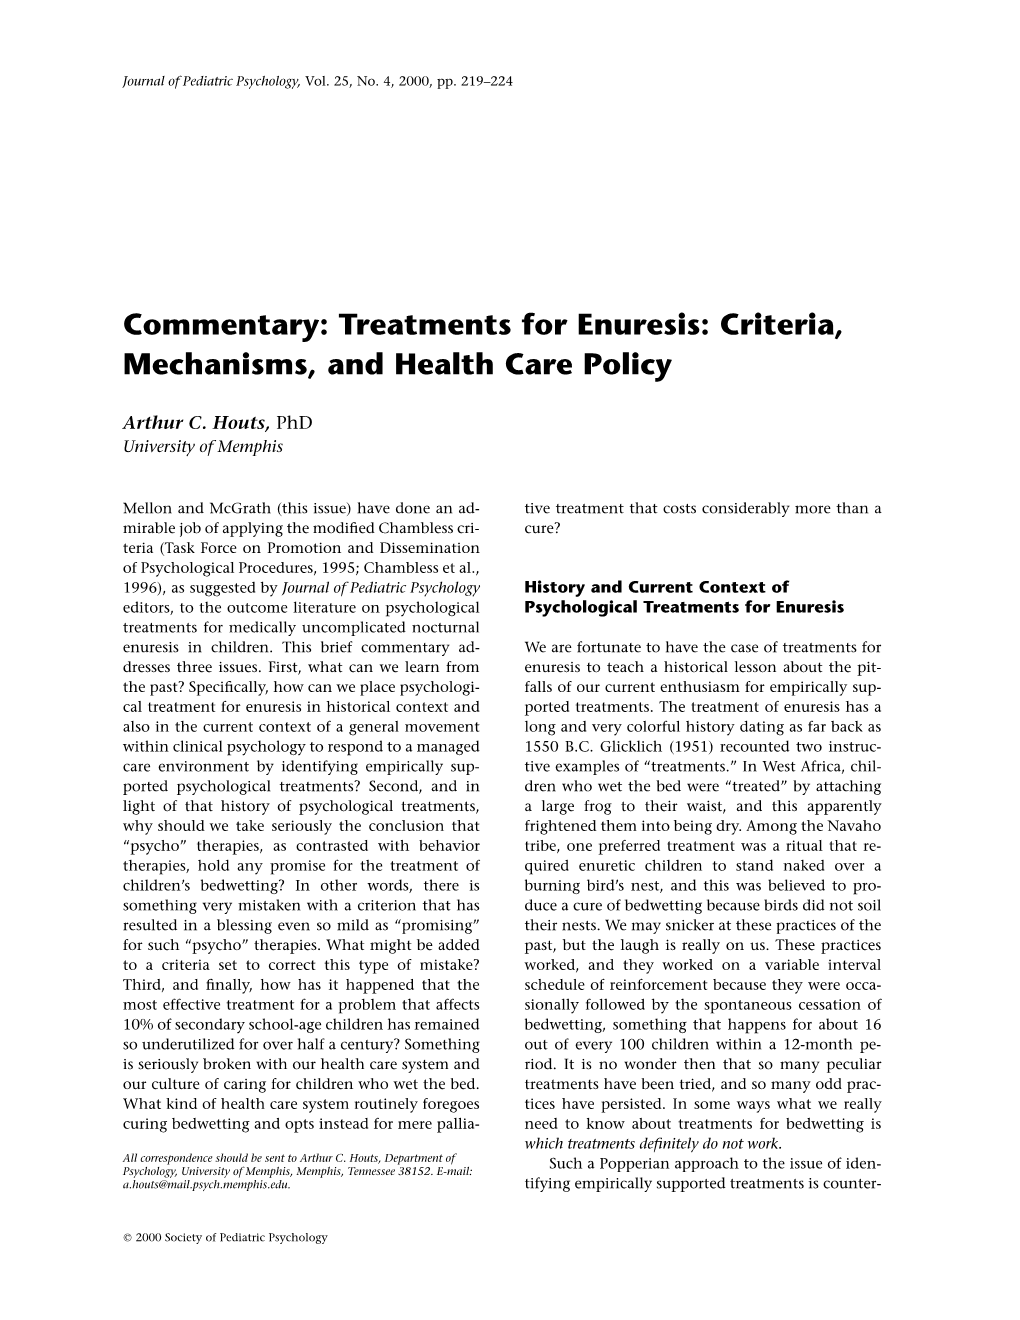 Treatments for Enuresis: Criteria, Mechanisms, and Health Care Policy